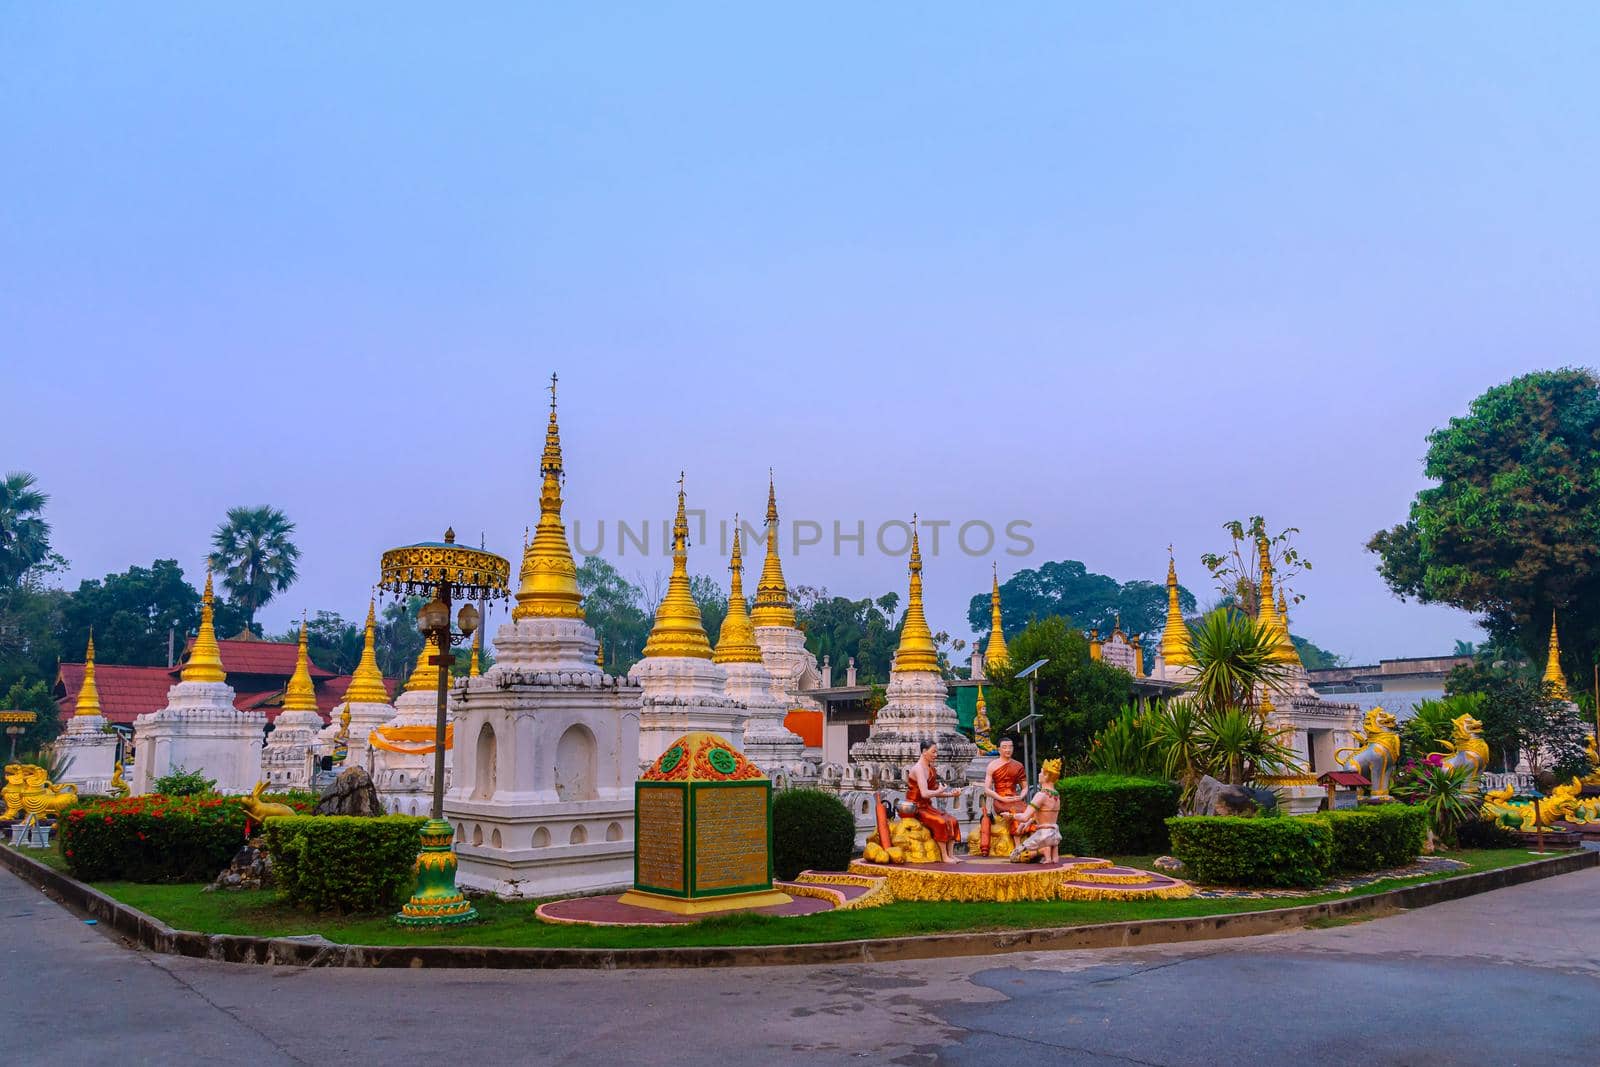 Wat Phra Chedi Sao Lang or Twenty pagodas temple is a Buddhist temple in Lampang province, Thailand